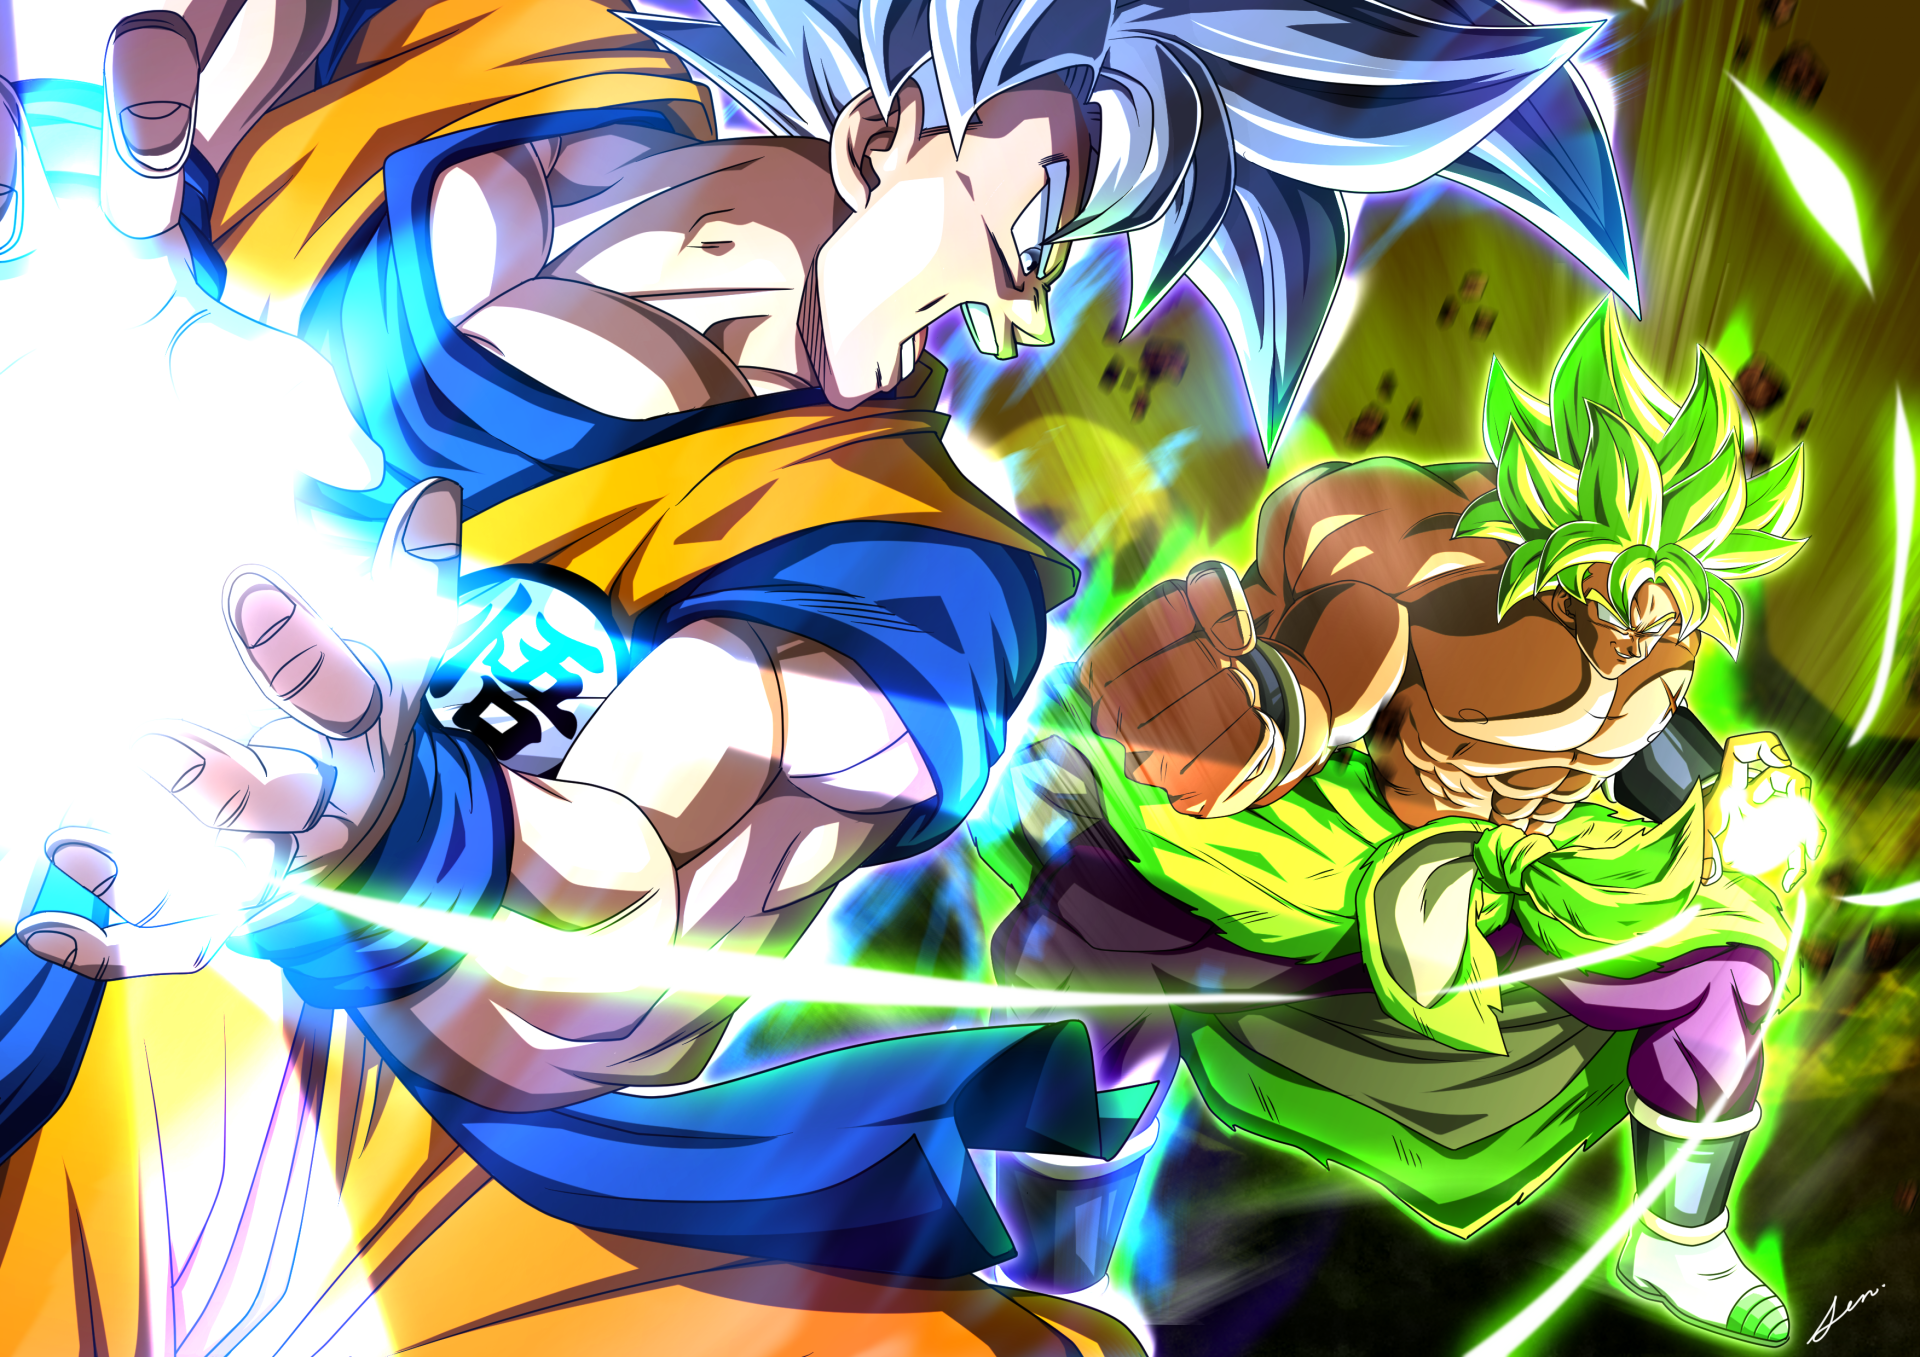 Goku Vs Broly Wallpaper Background Image. View, download, comment, and rate. Dragon ball wallpaper, Dragon ball artwork, Anime dragon ball super